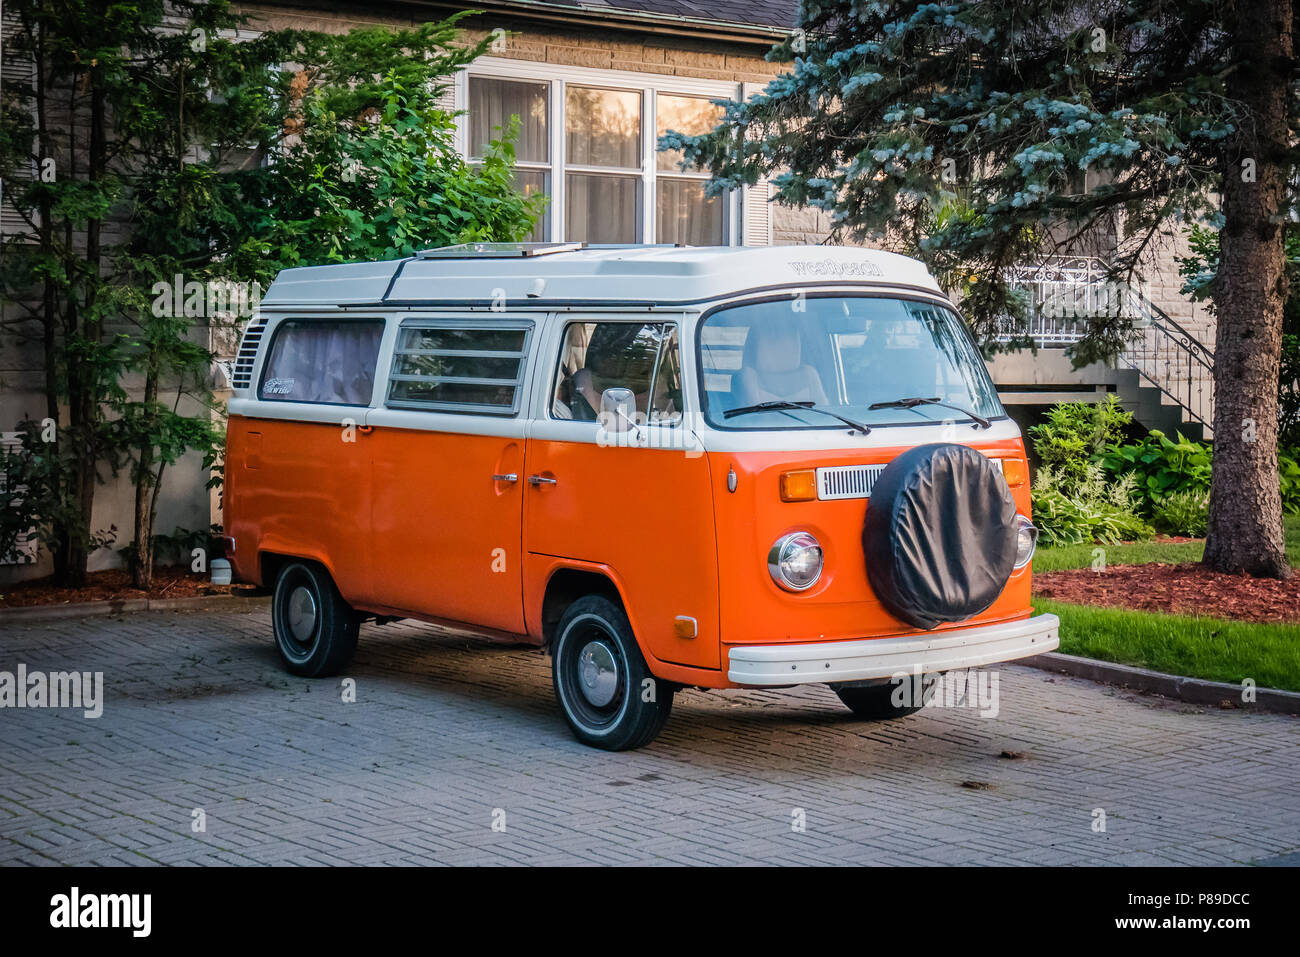 Volkswagen Type 2 Camper Van High Resolution Stock Photography and Images - Alamy